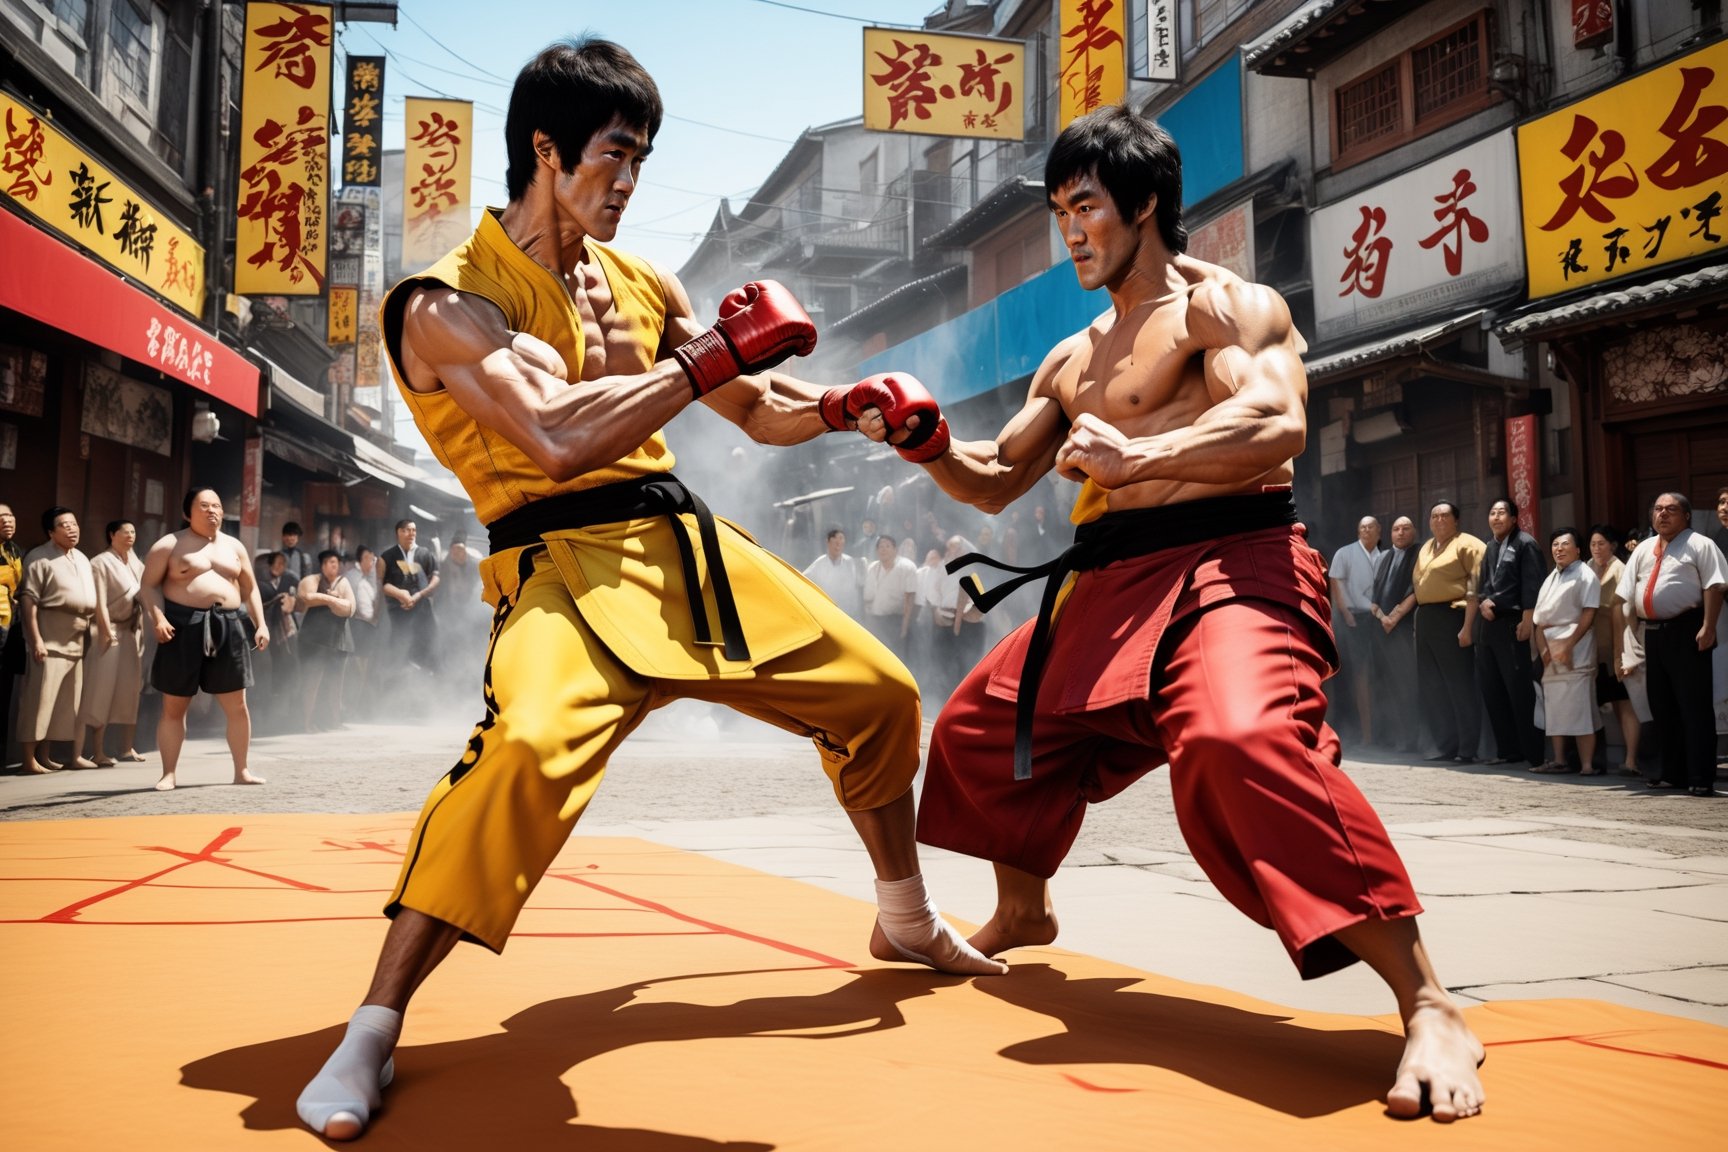 2 fighters in the street, (Bruce Lee:2.5), vs. (Hakuhō Shō sumo:2), (fighting game style:2), in the style of simon bisley, Karol Bak, Reiq, dynamic, vibrant, action-packed, detailed character design, reminiscent of fighting video games, Dynamic motion blur, silverpoint, infinite detail to every pore, 